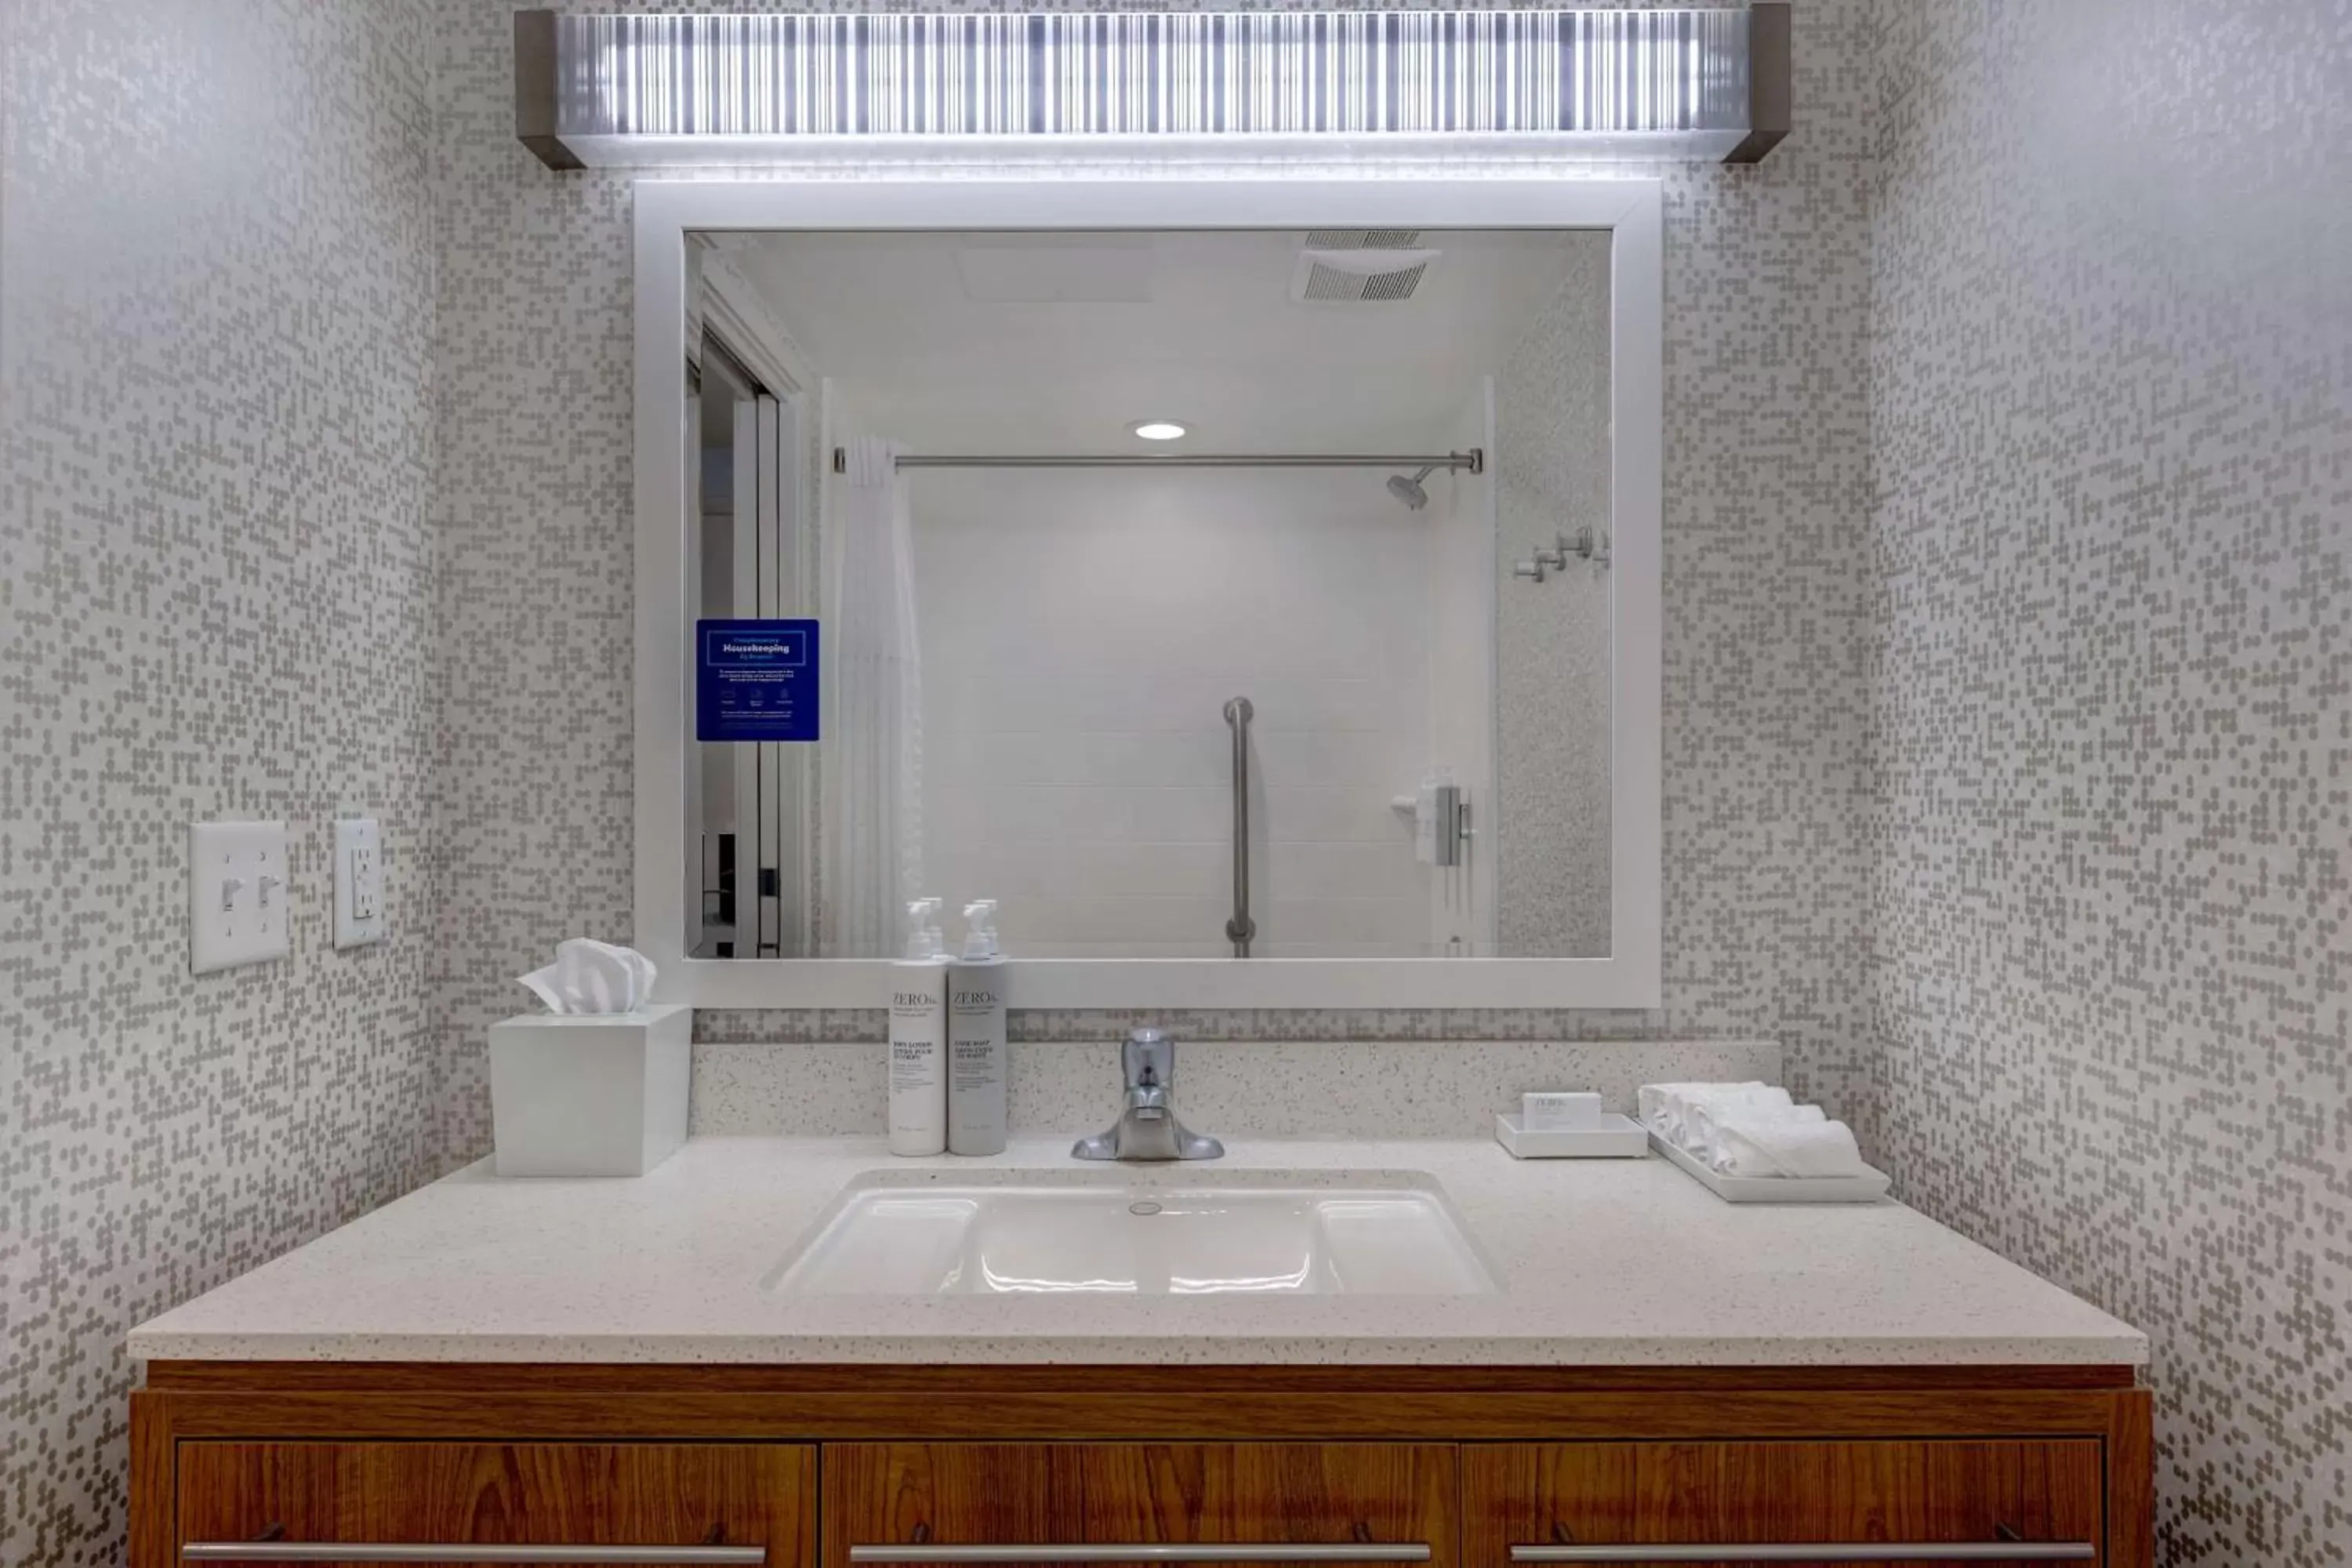 Bathroom in Home2 Suites by Hilton Orlando International Drive South